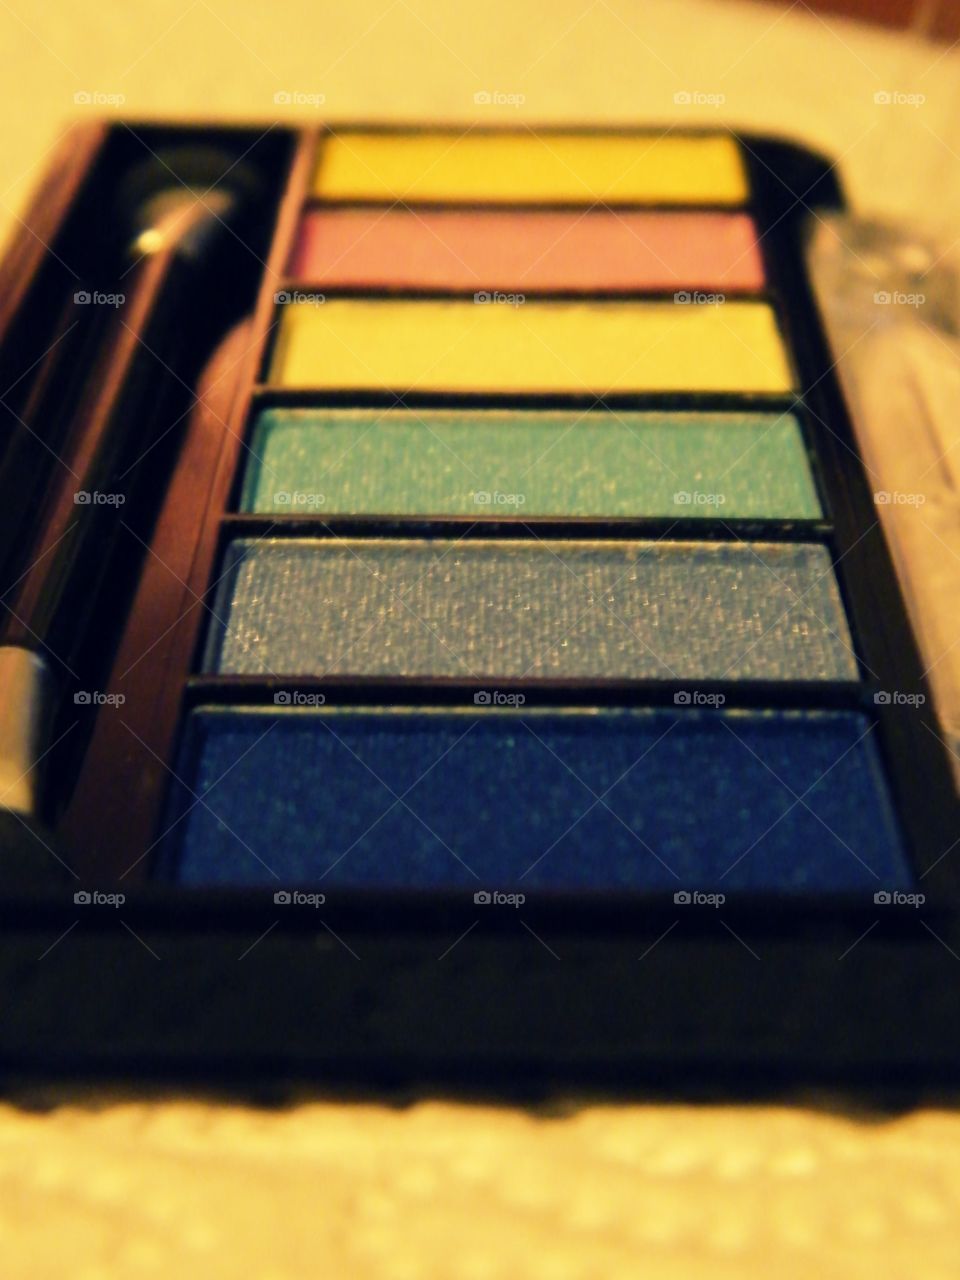 Eyeshadow. Bright colors when you want to let loose